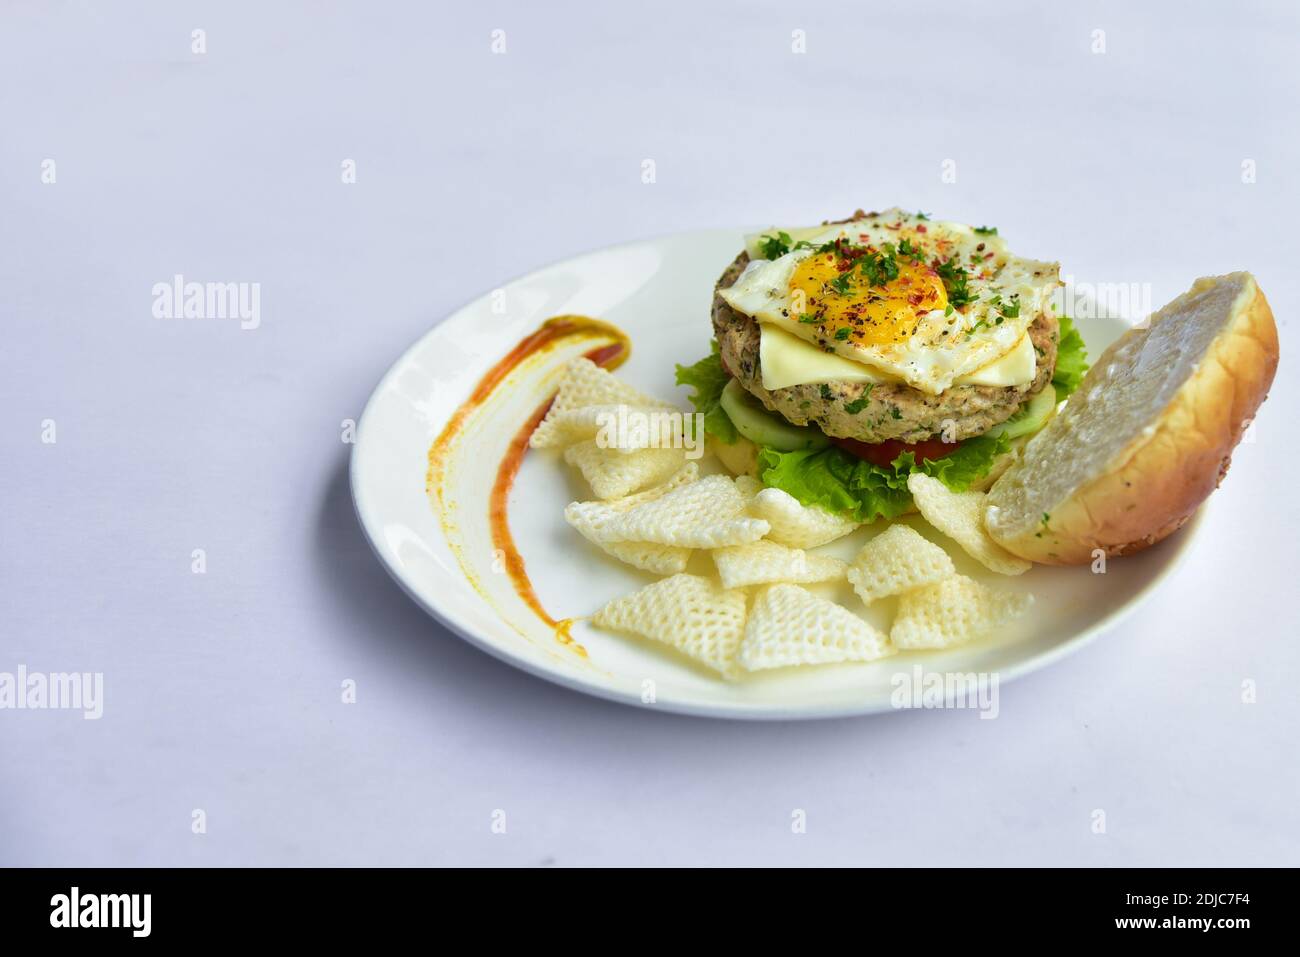 burger on a plate with chips. burger with patty and vegetables like cucumber, tomatoes, lettuce and half boiled egg and chips. Stock Photo